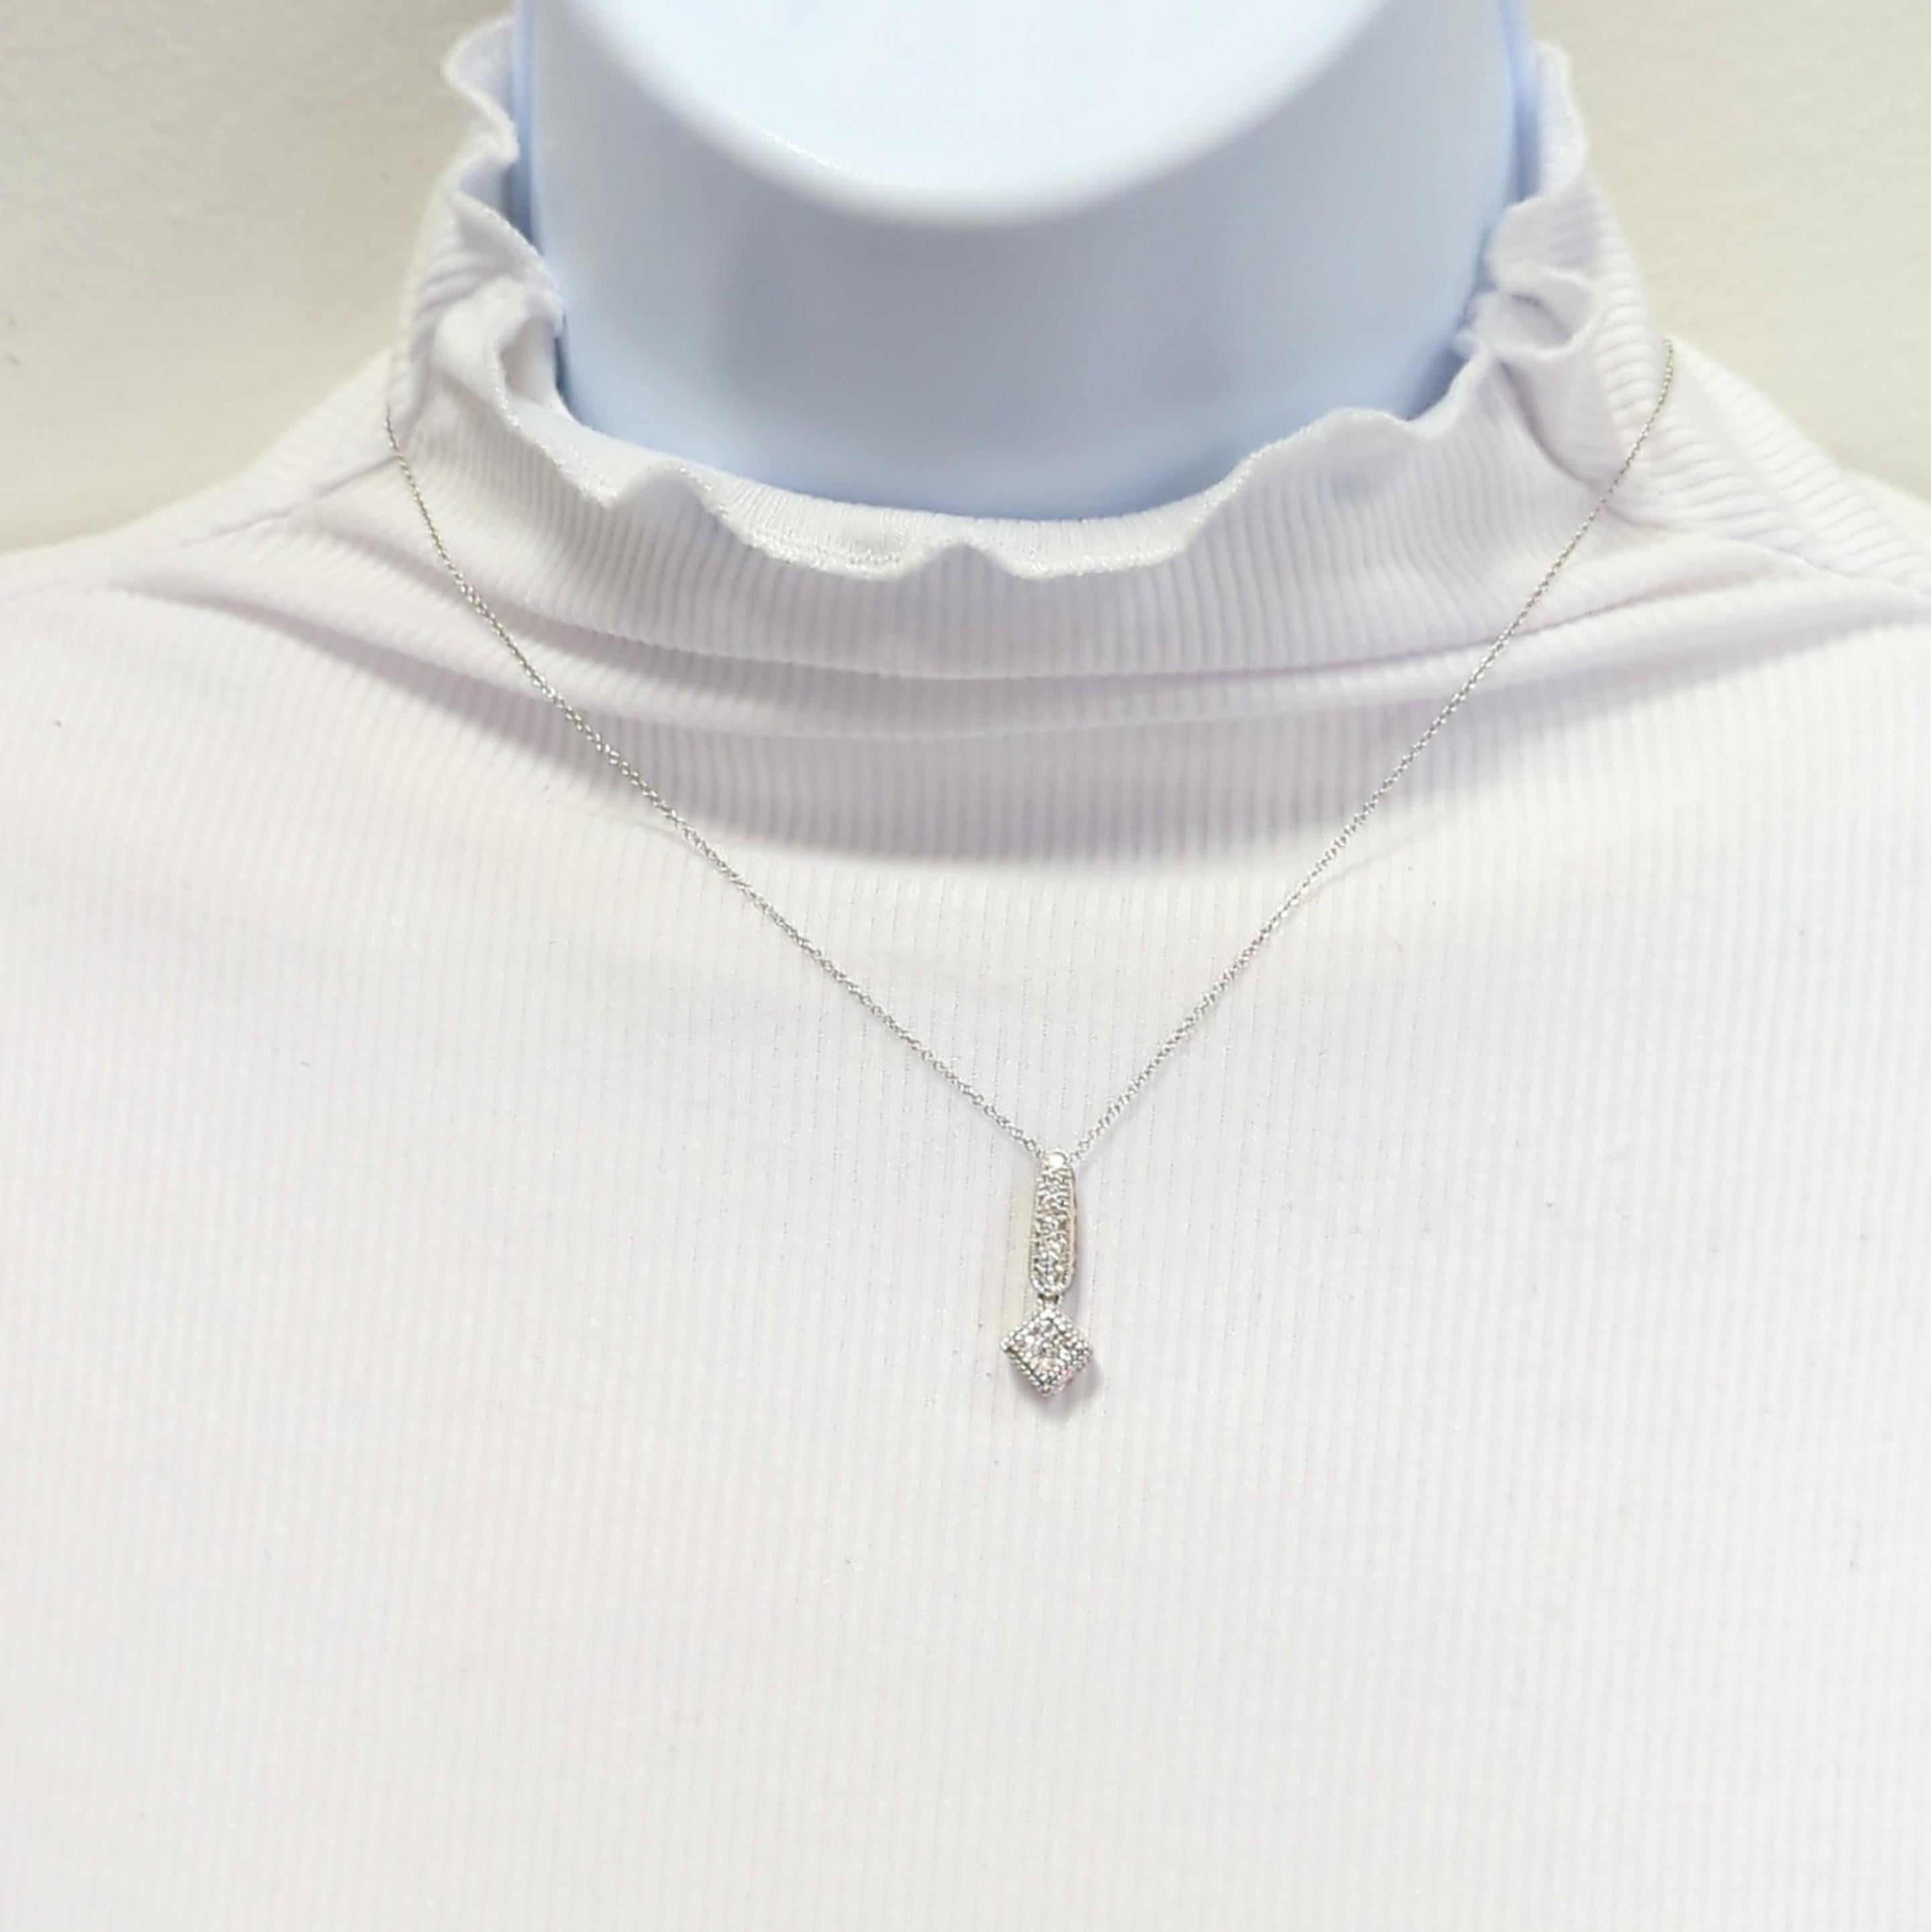 Beautiful pendant necklace with 0.28 ct. of round diamonds that are bright, white, and good quality.